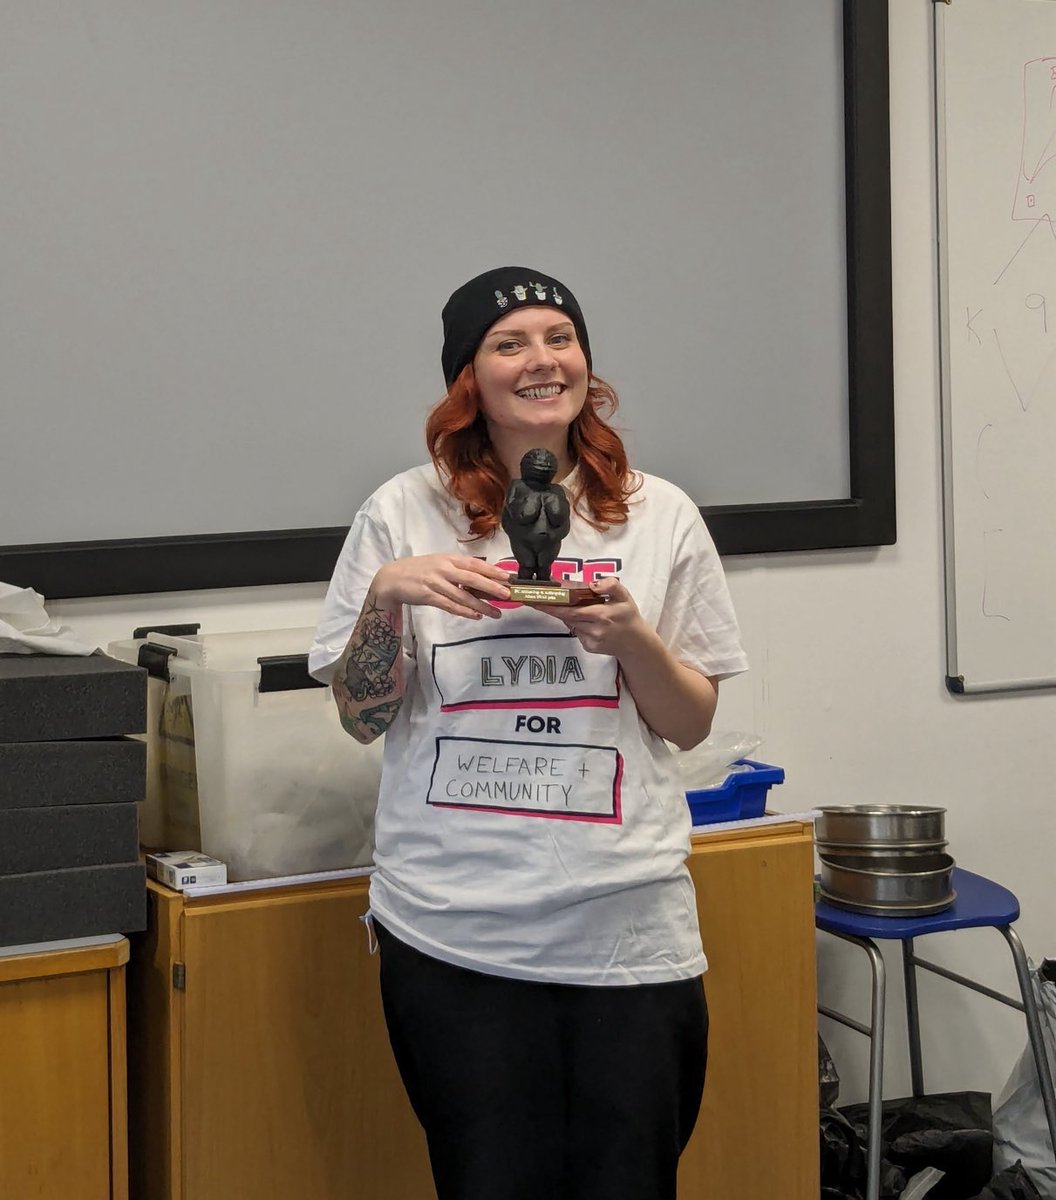 Huge congratulations to PhD student Megan Russell, who won the Department of Archaeology & Anthropology's Athena SWAN prize for her work supporting the principles of equality, diversity and inclusivity in the department - reaction shot of her unveiling of the amazing trophy!